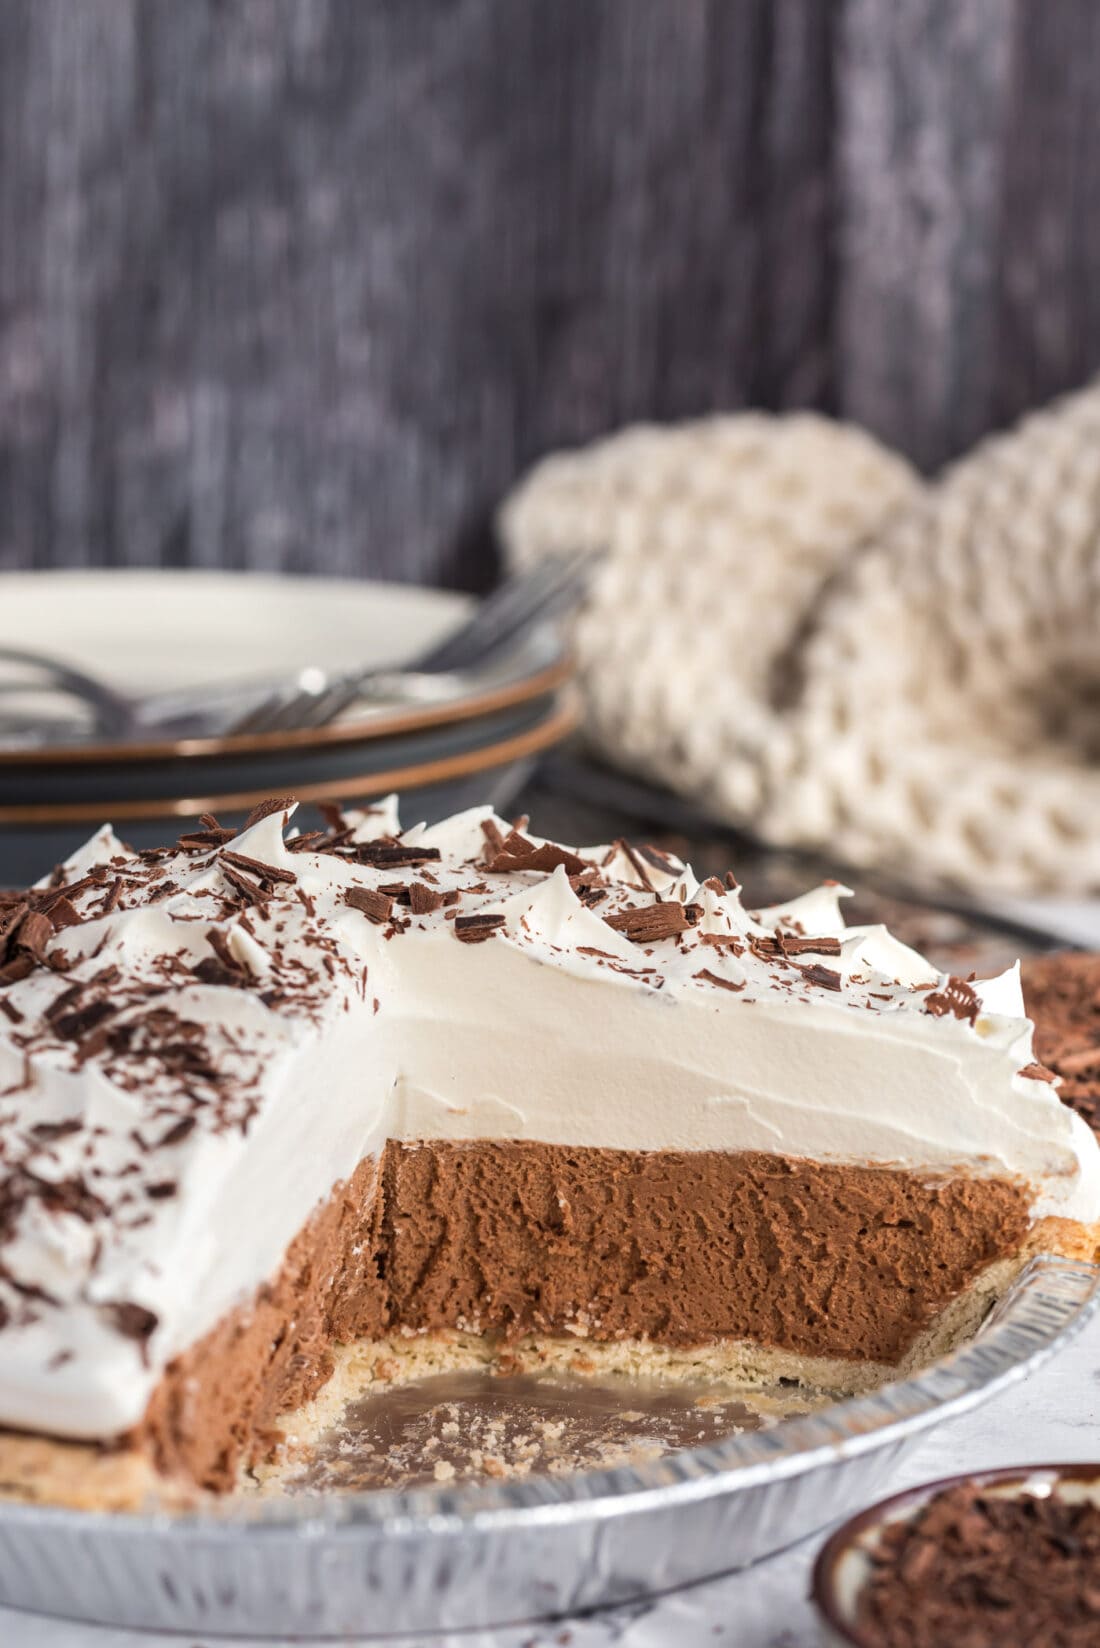 French Silk Pie with a slices removed